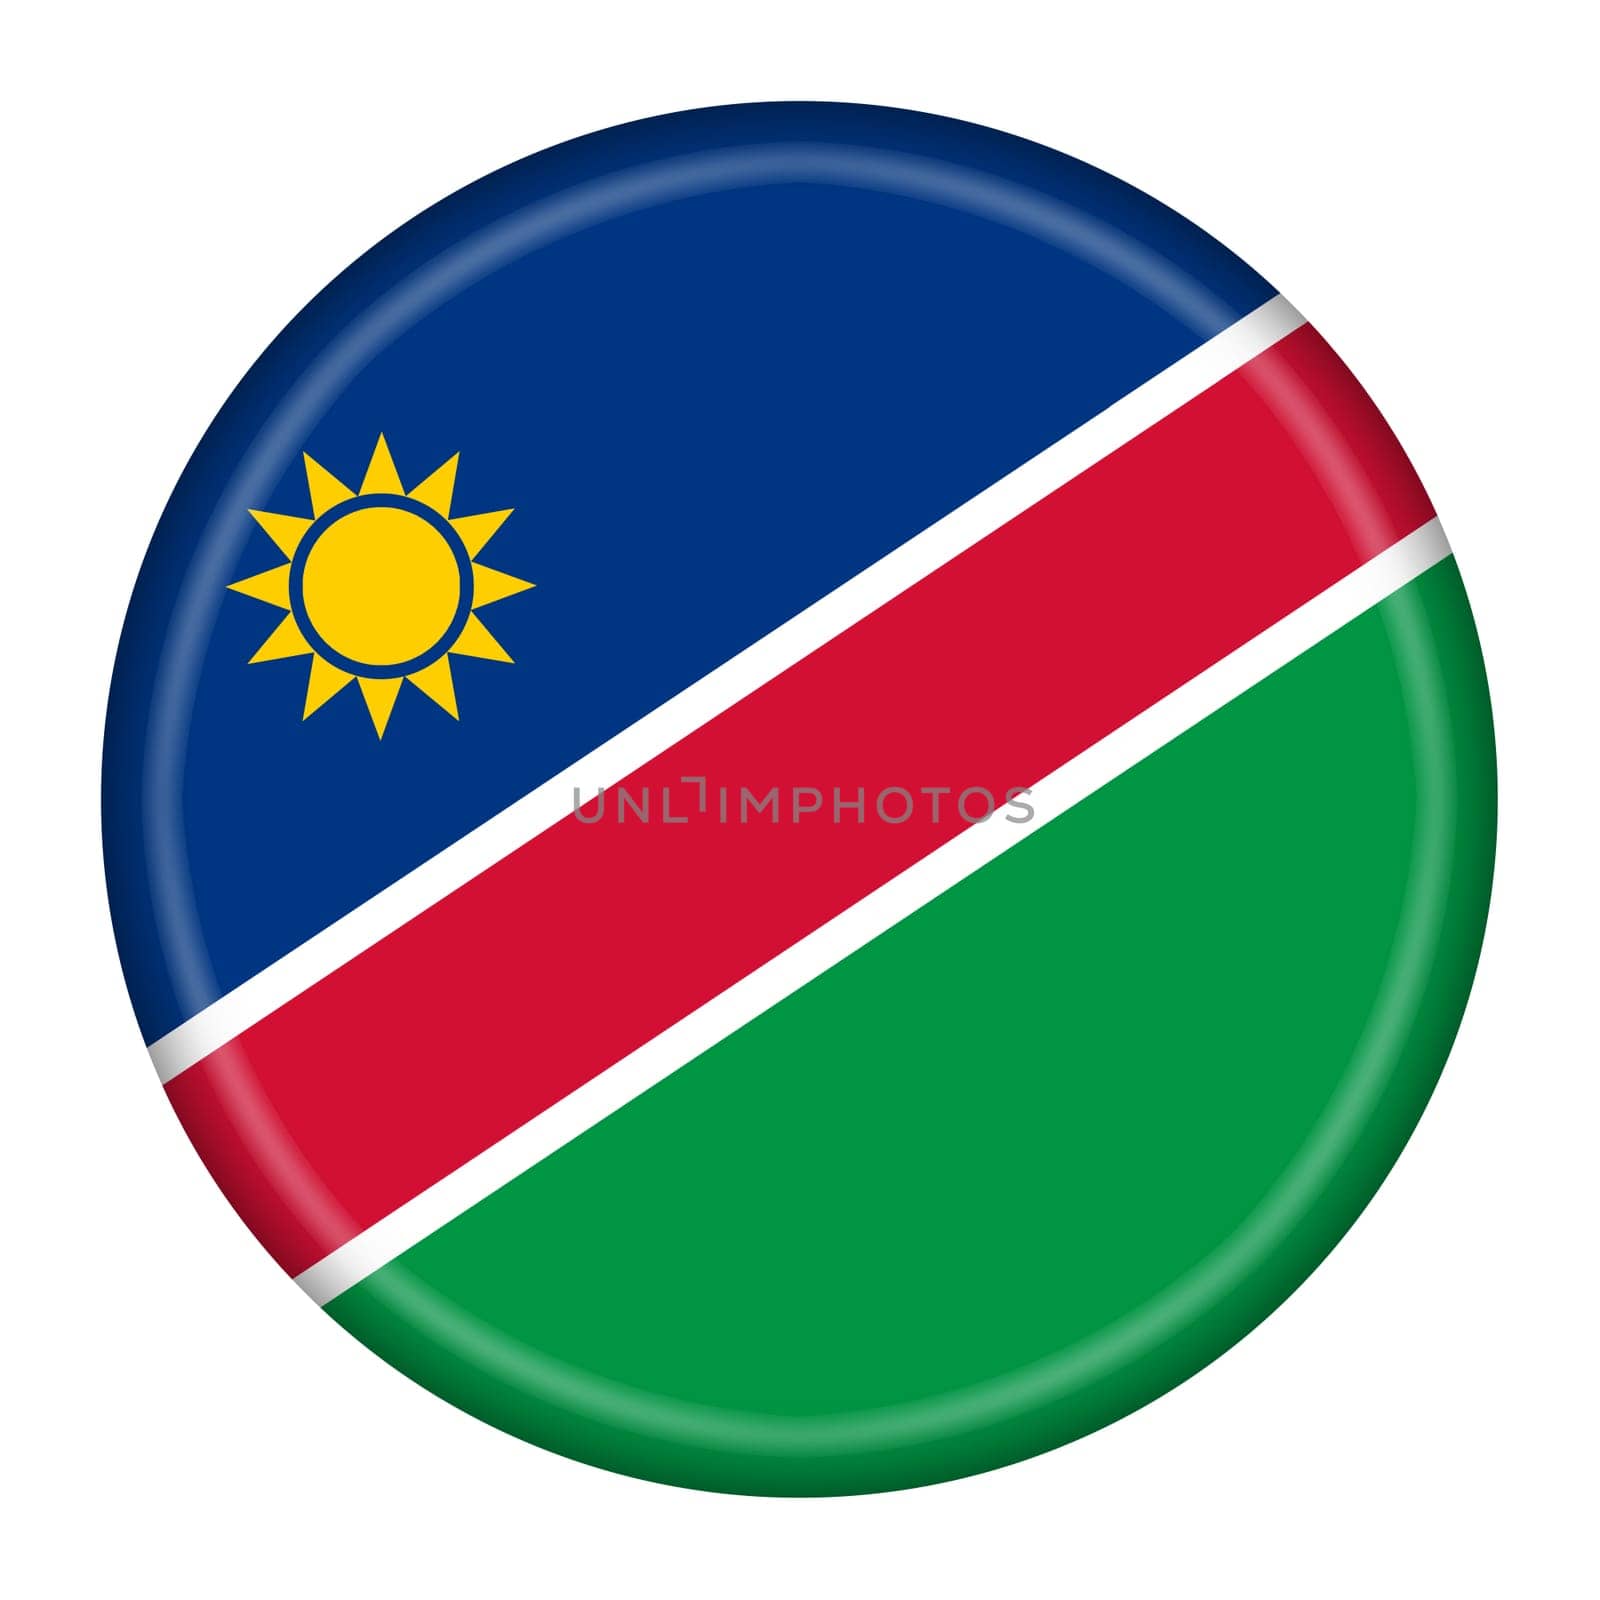 A Namibia flag button 3d illustration with clipping path red green blue white yellow sun